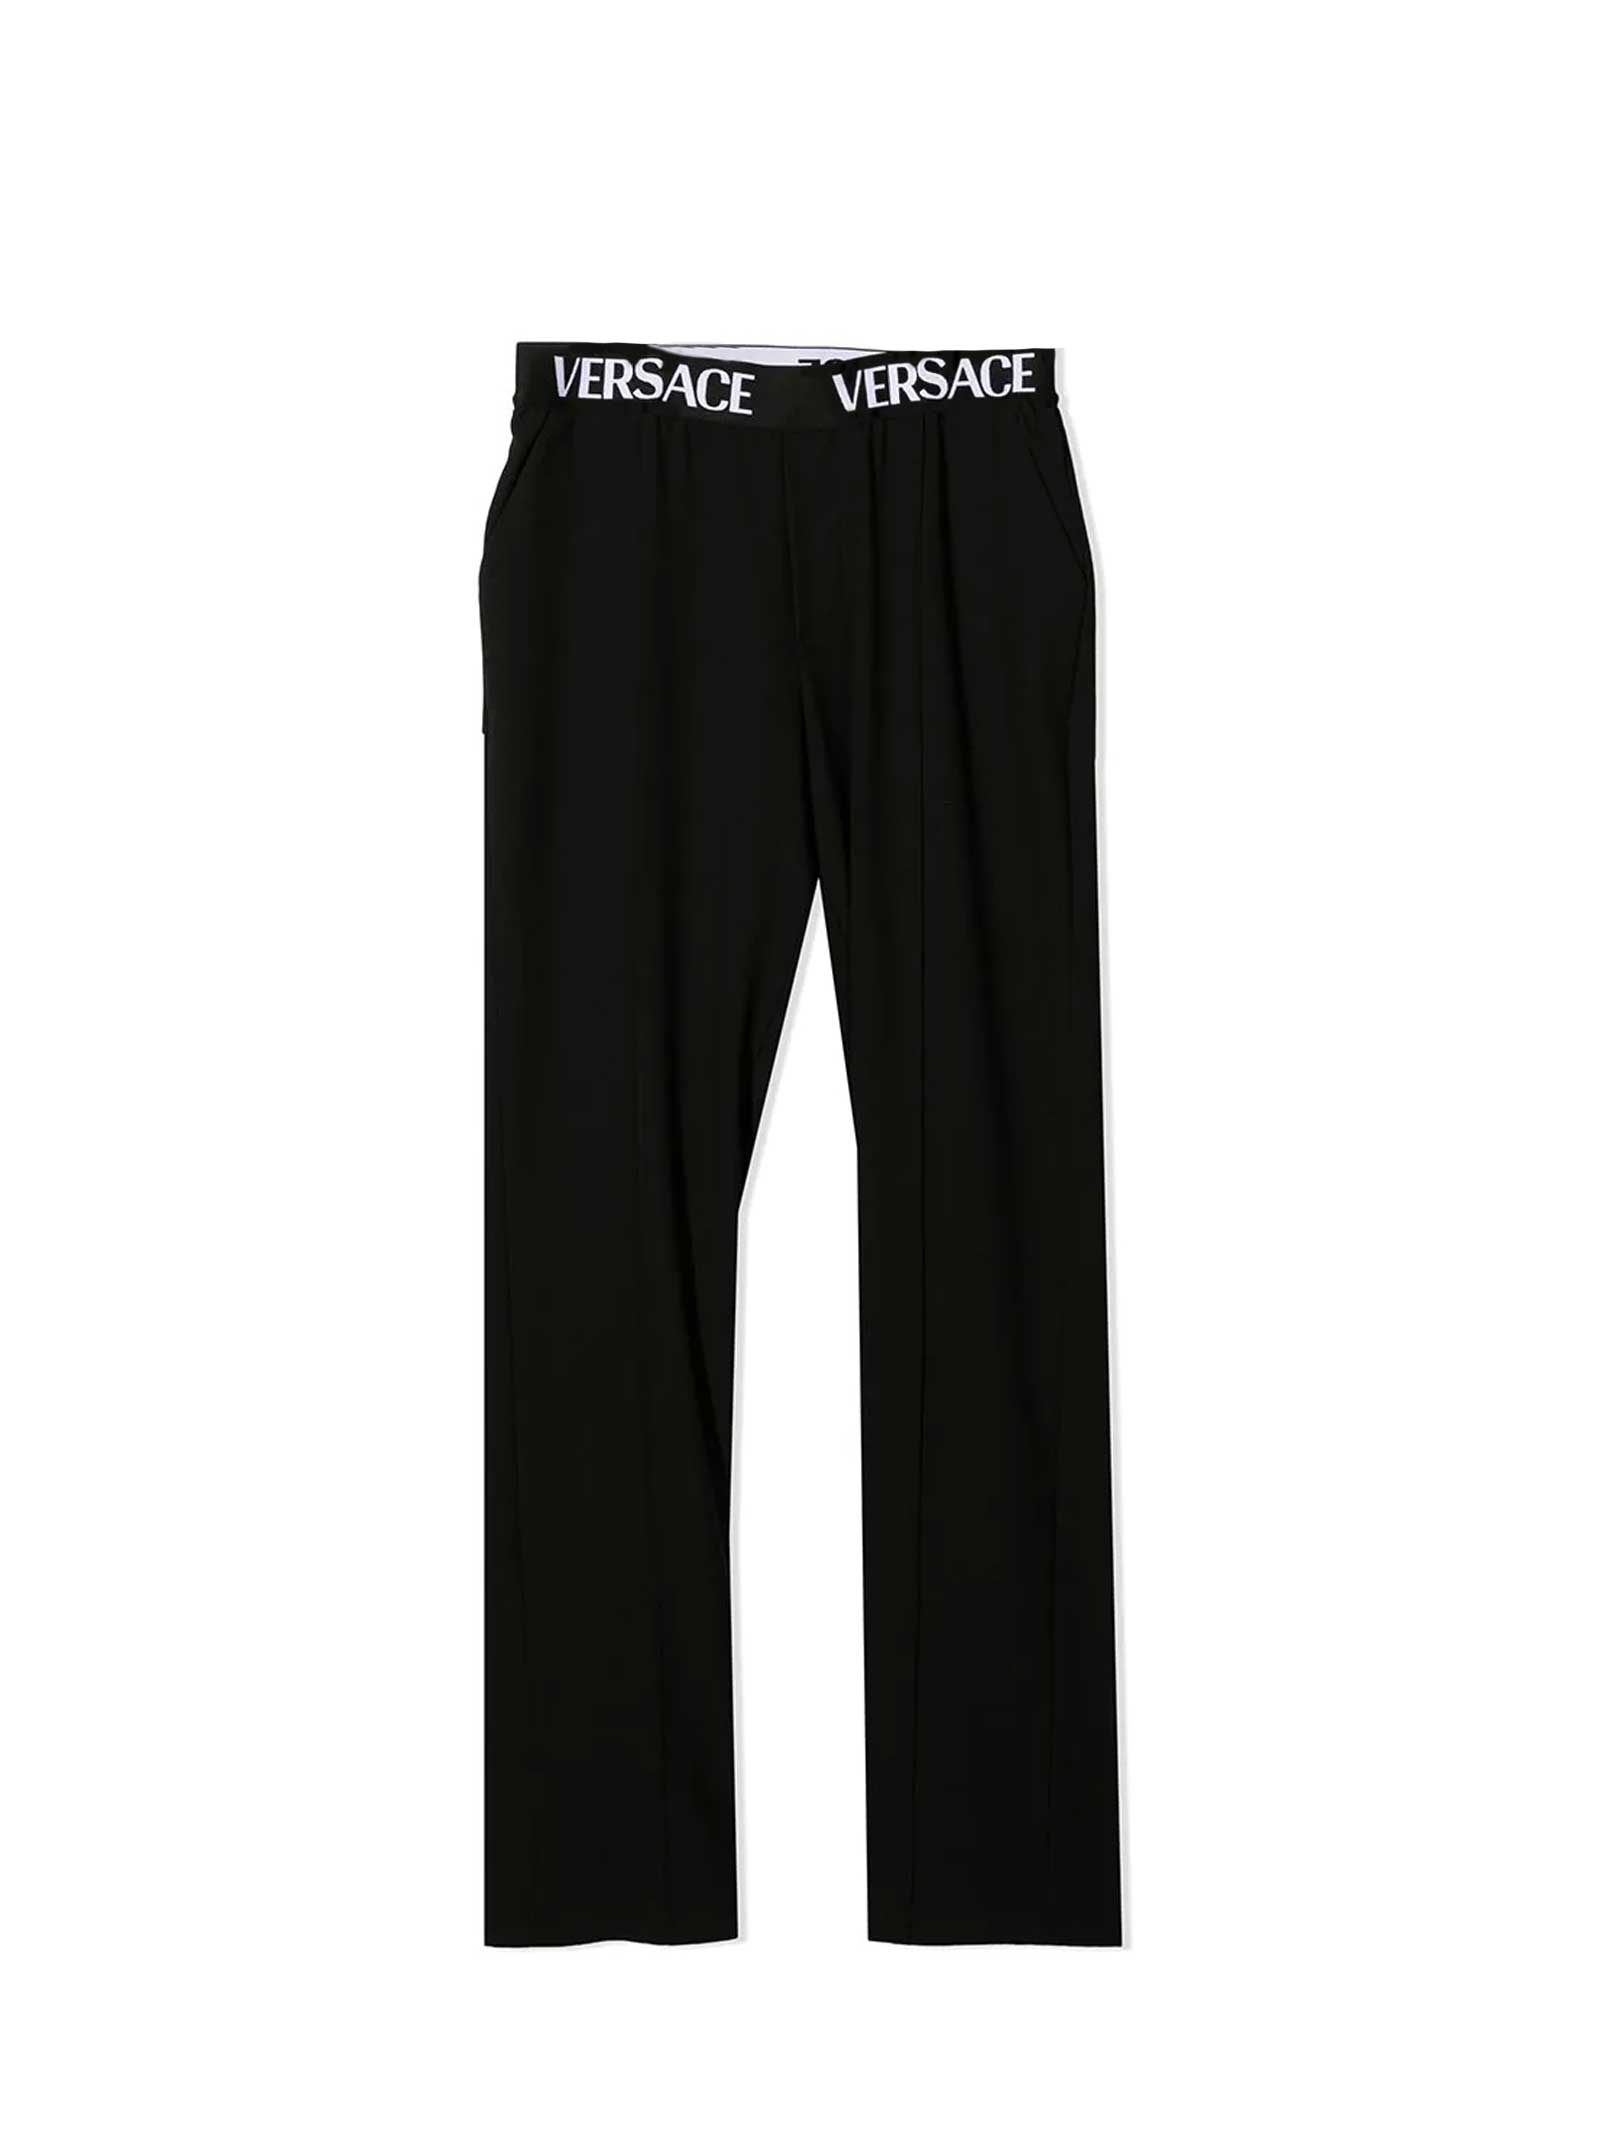 VERSACE BLACK TROUSERS WITH LOGO KIDS